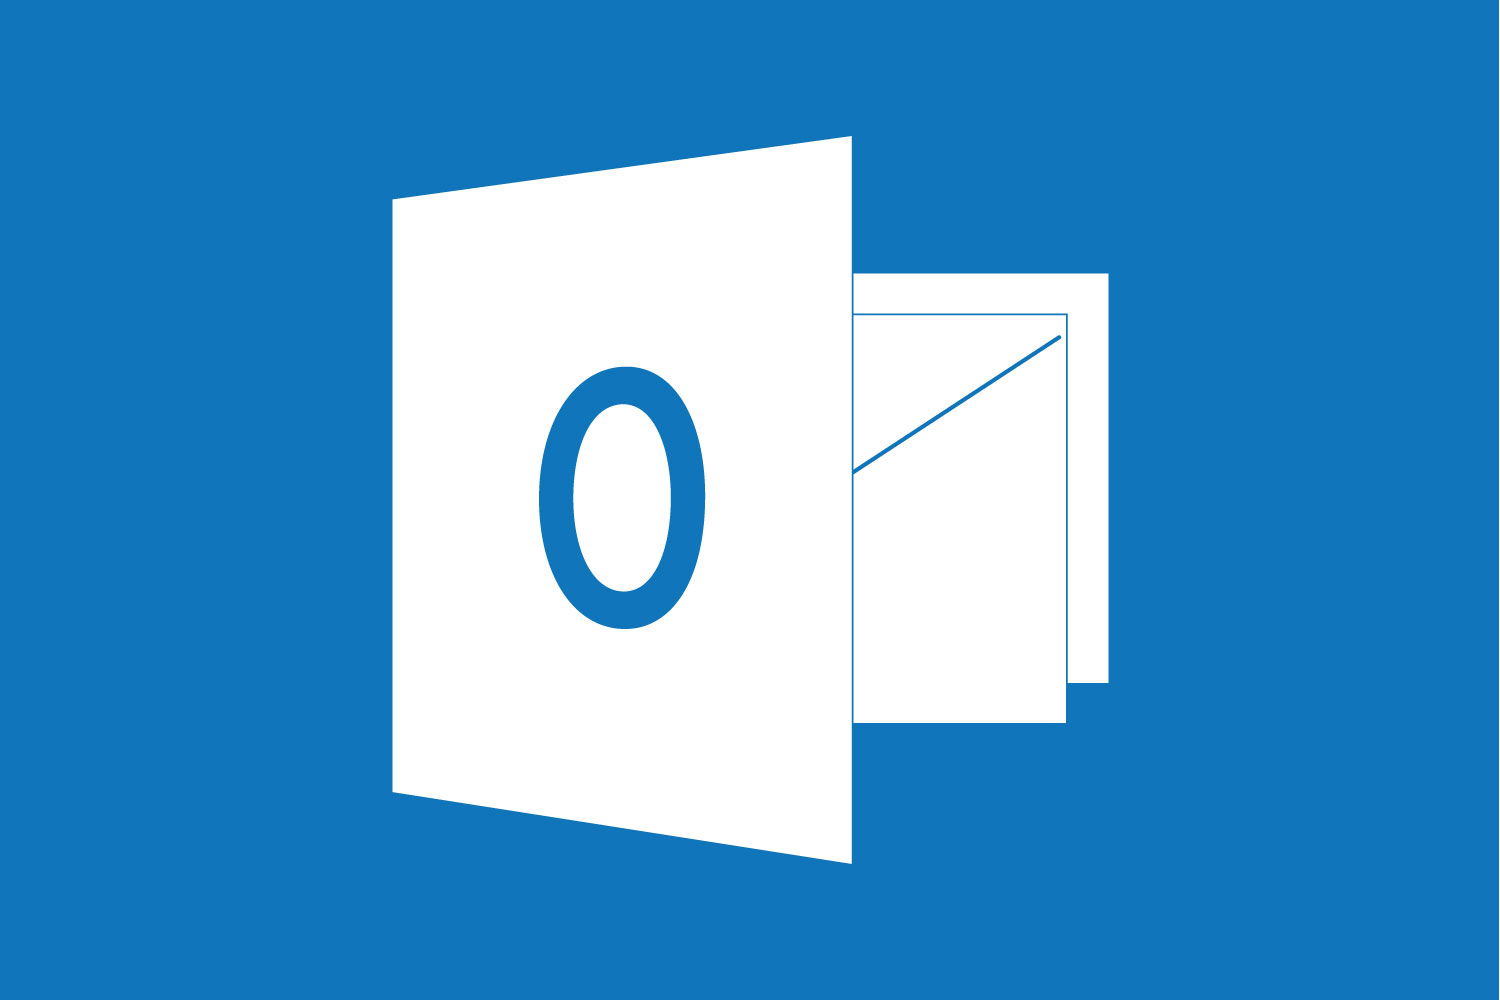 microsoft office with outlook one time purchase